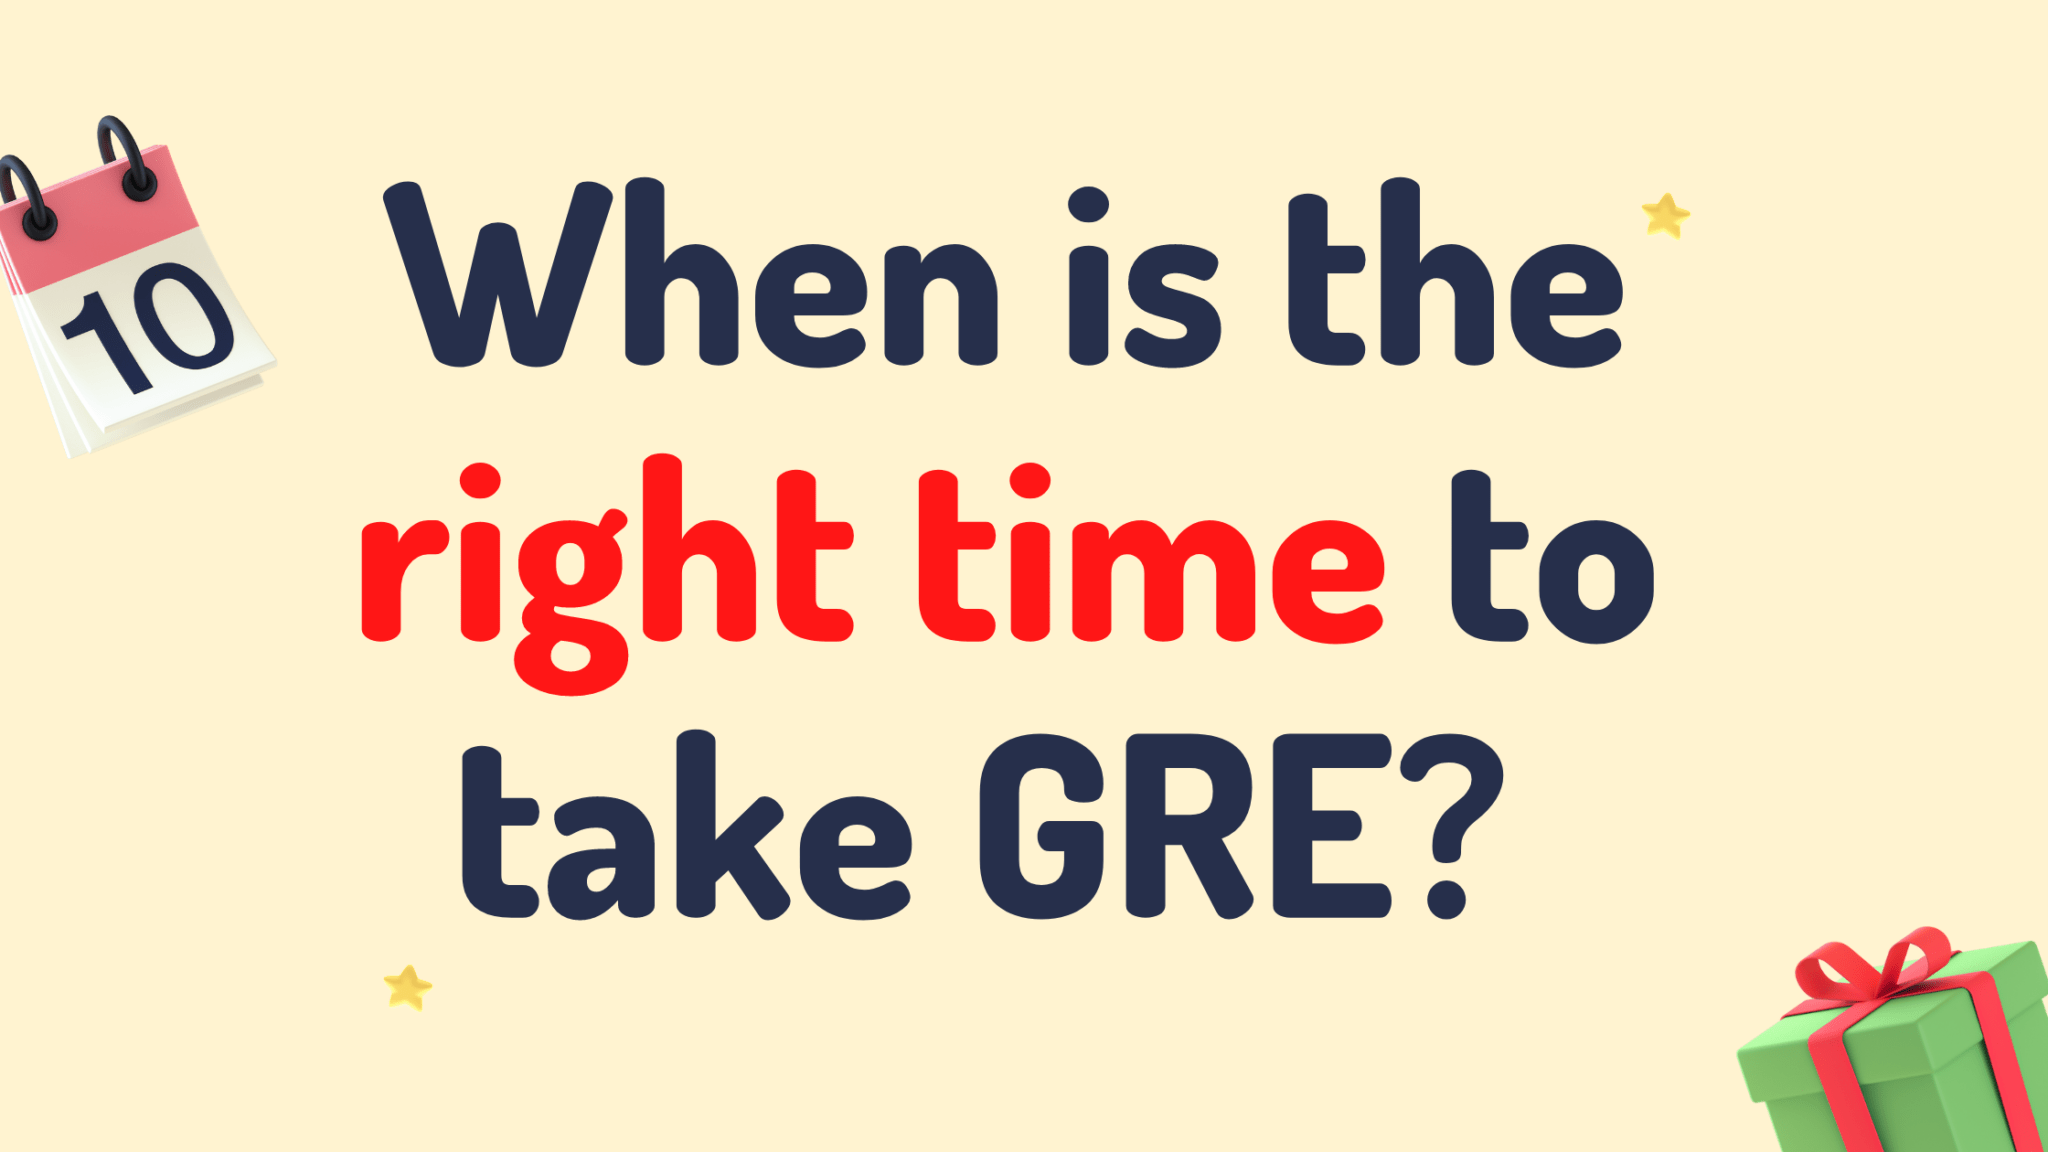 When is the right time to take the GRE?